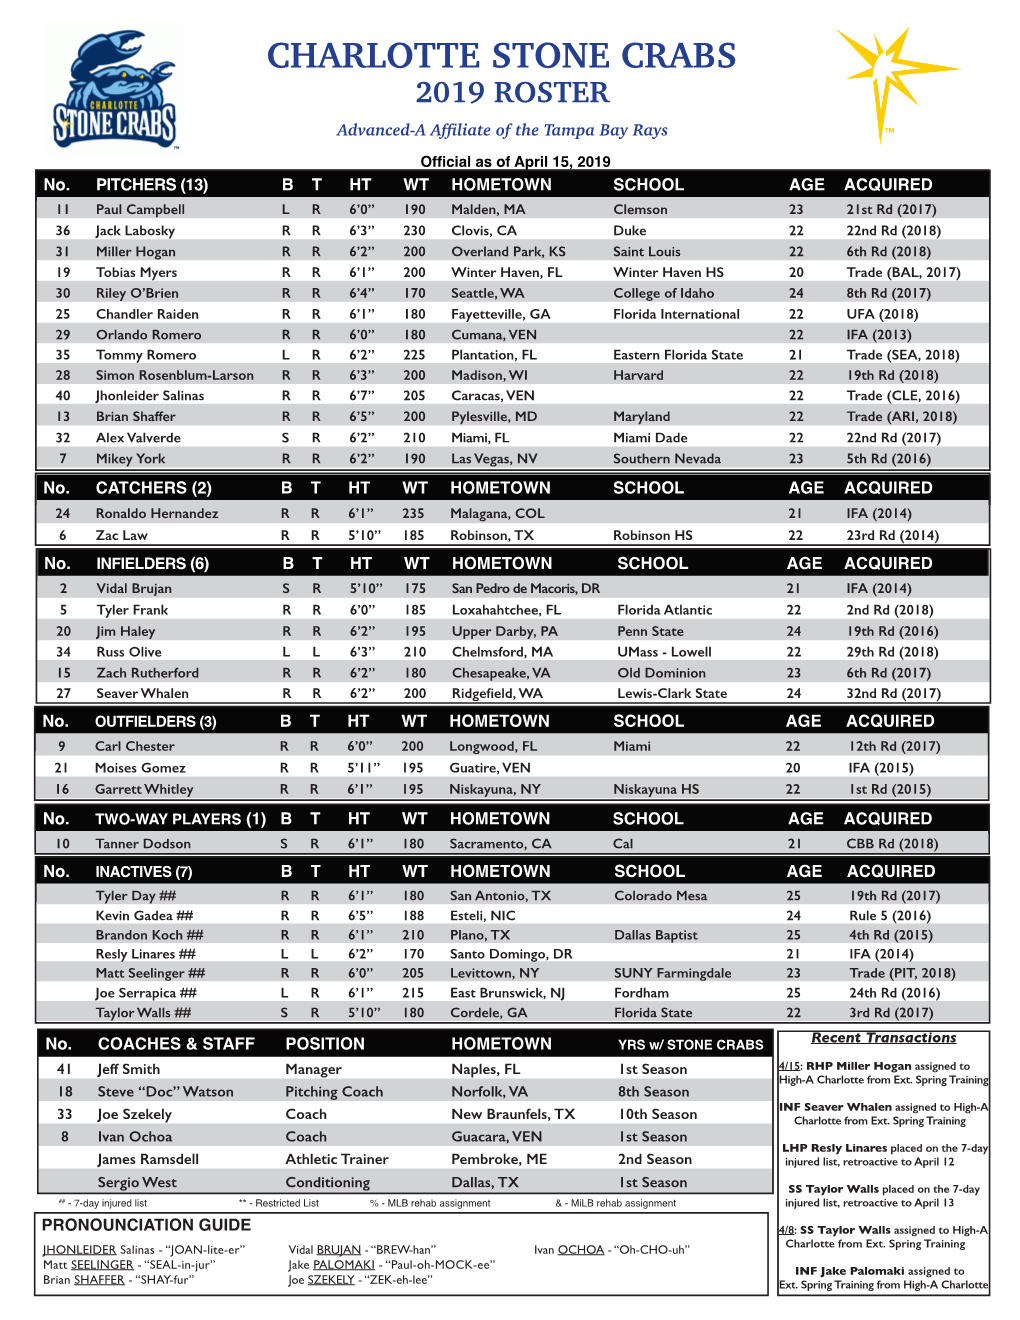 CHARLOTTE STONE CRABS 2019 ROSTER Advanced-A Affiliate of the Tampa Bay Rays